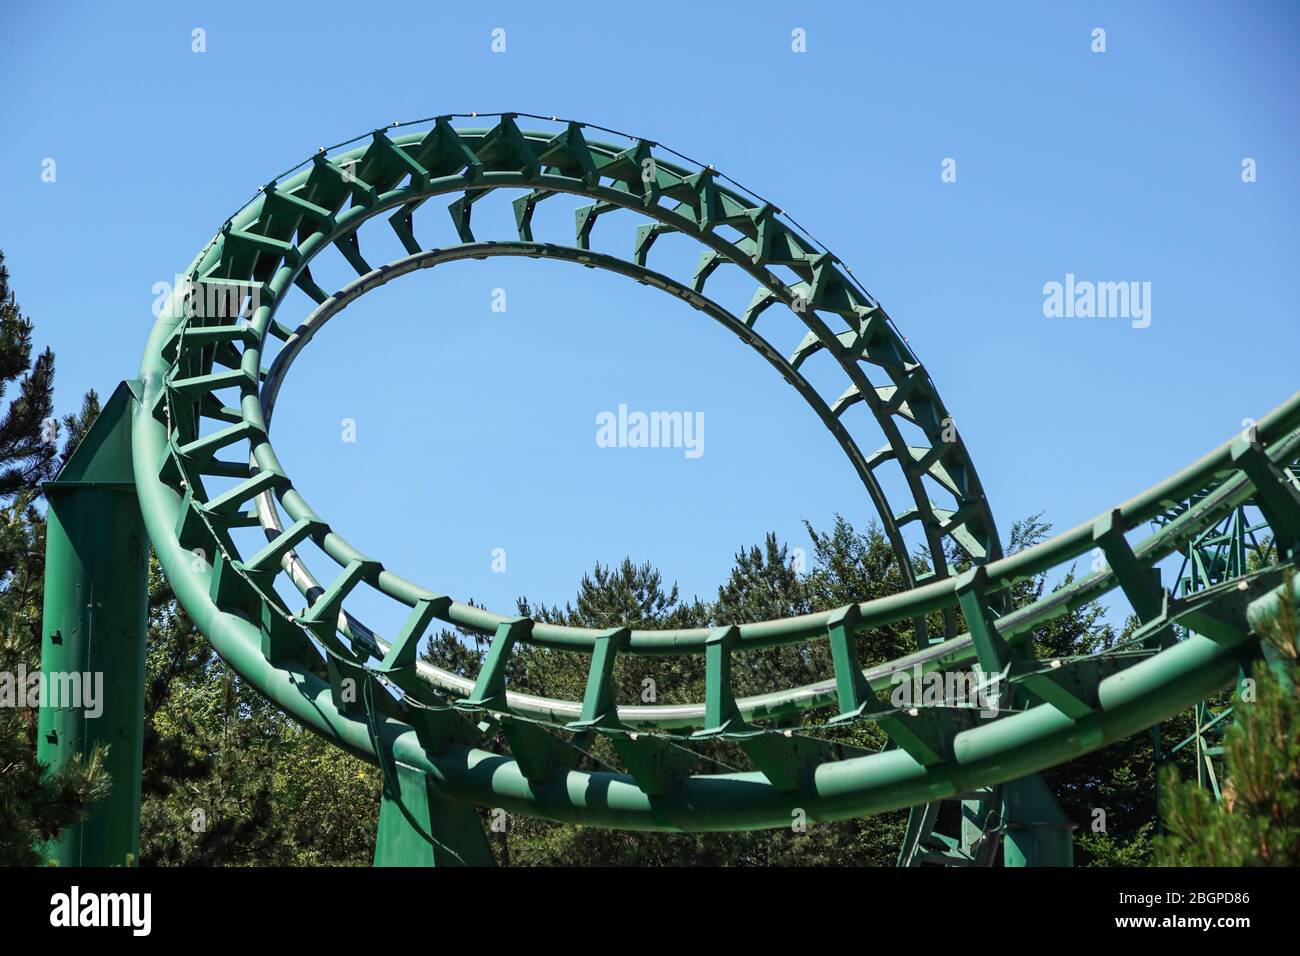 Loop and turn on a green roller coaster in an amusement park Stock Photo